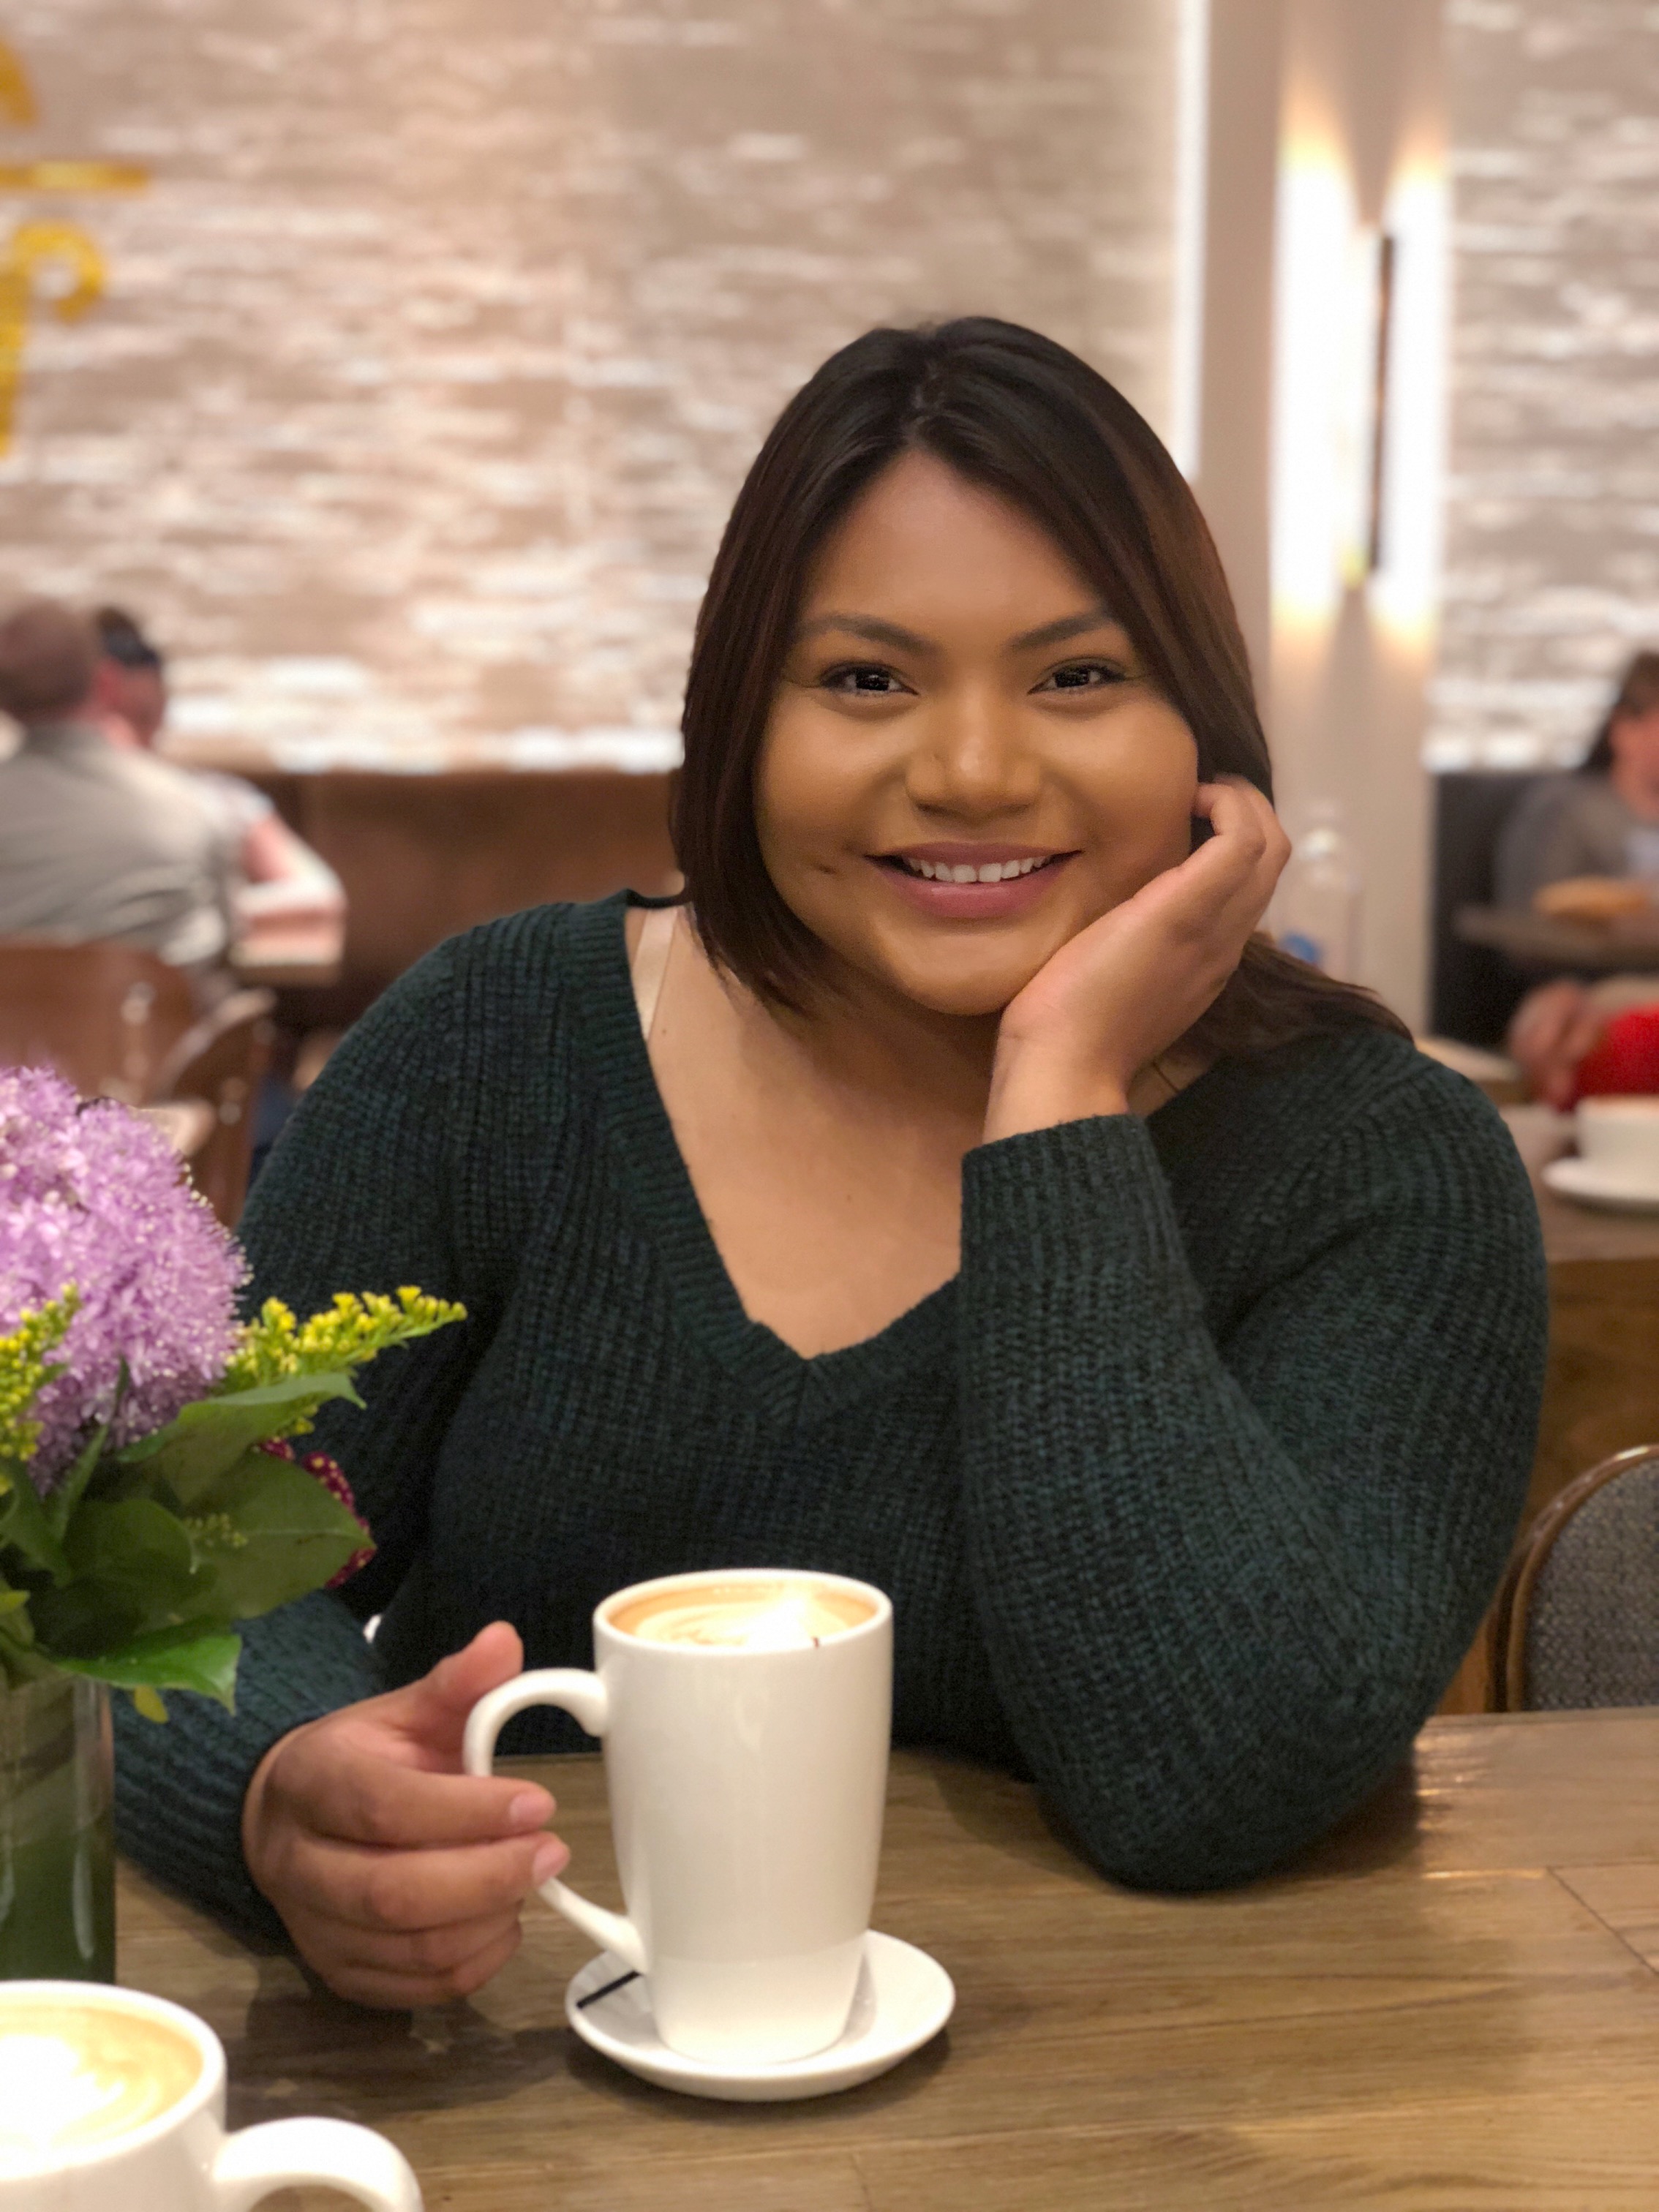 Cecelia Hernandez smiles into the camera while holding a cup of coffee.